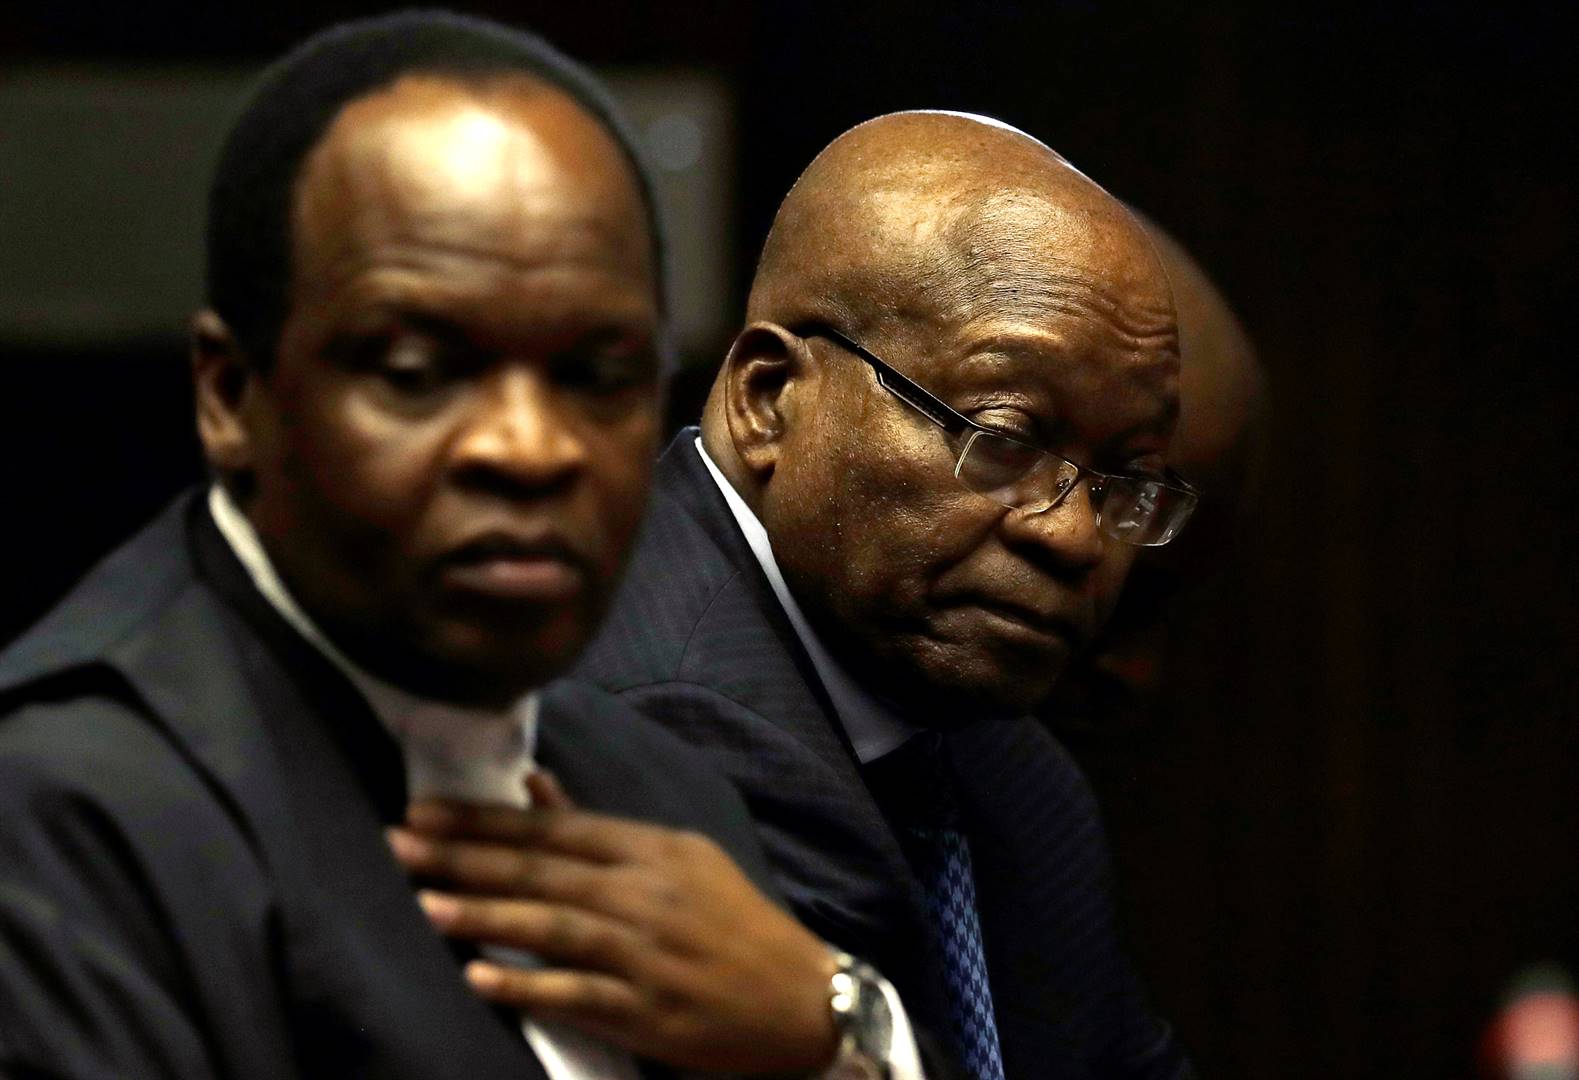 Jacob Zuma sits beside members of his legal team in court in Pietermaritzburg. He faces charges that include fraud, corruption and racketeering. Picture: Themba Hadebe/Reuters